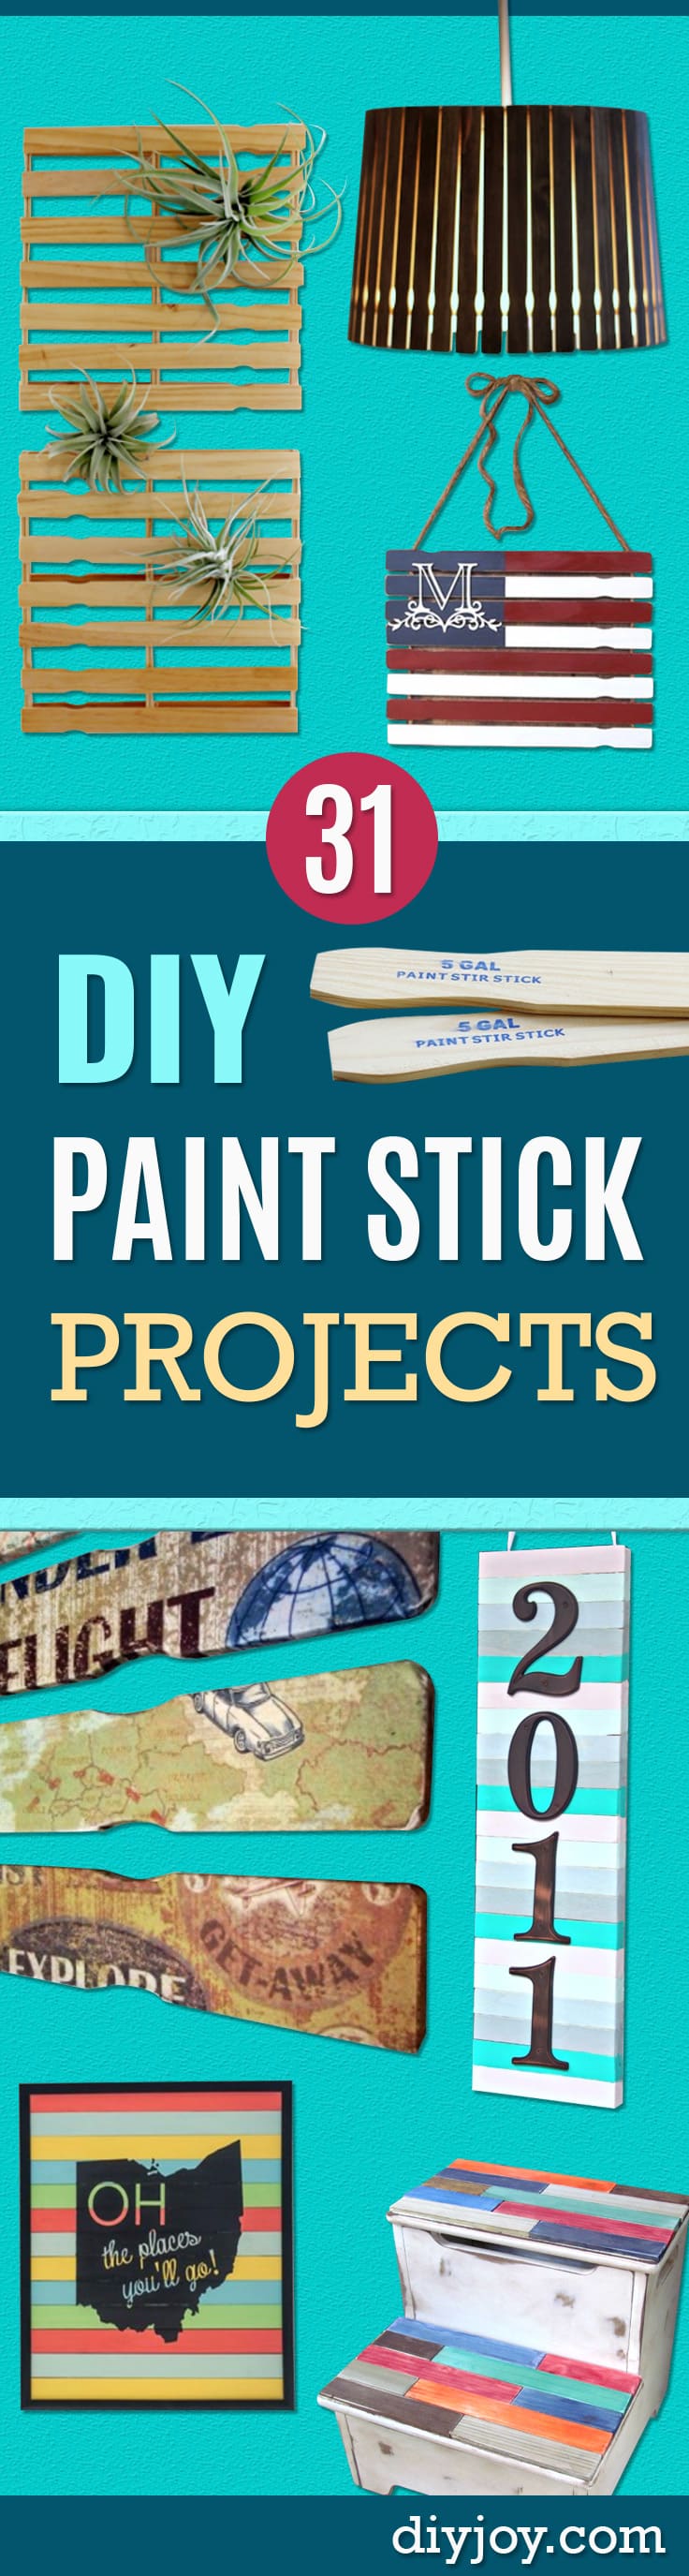 DIY Projects Made With Paint Sticks - Best Creative Crafts, Easy DYI Projects You Can Make With Paint Sticks From The Hardware Store - Cool Paint Stick Crafts 